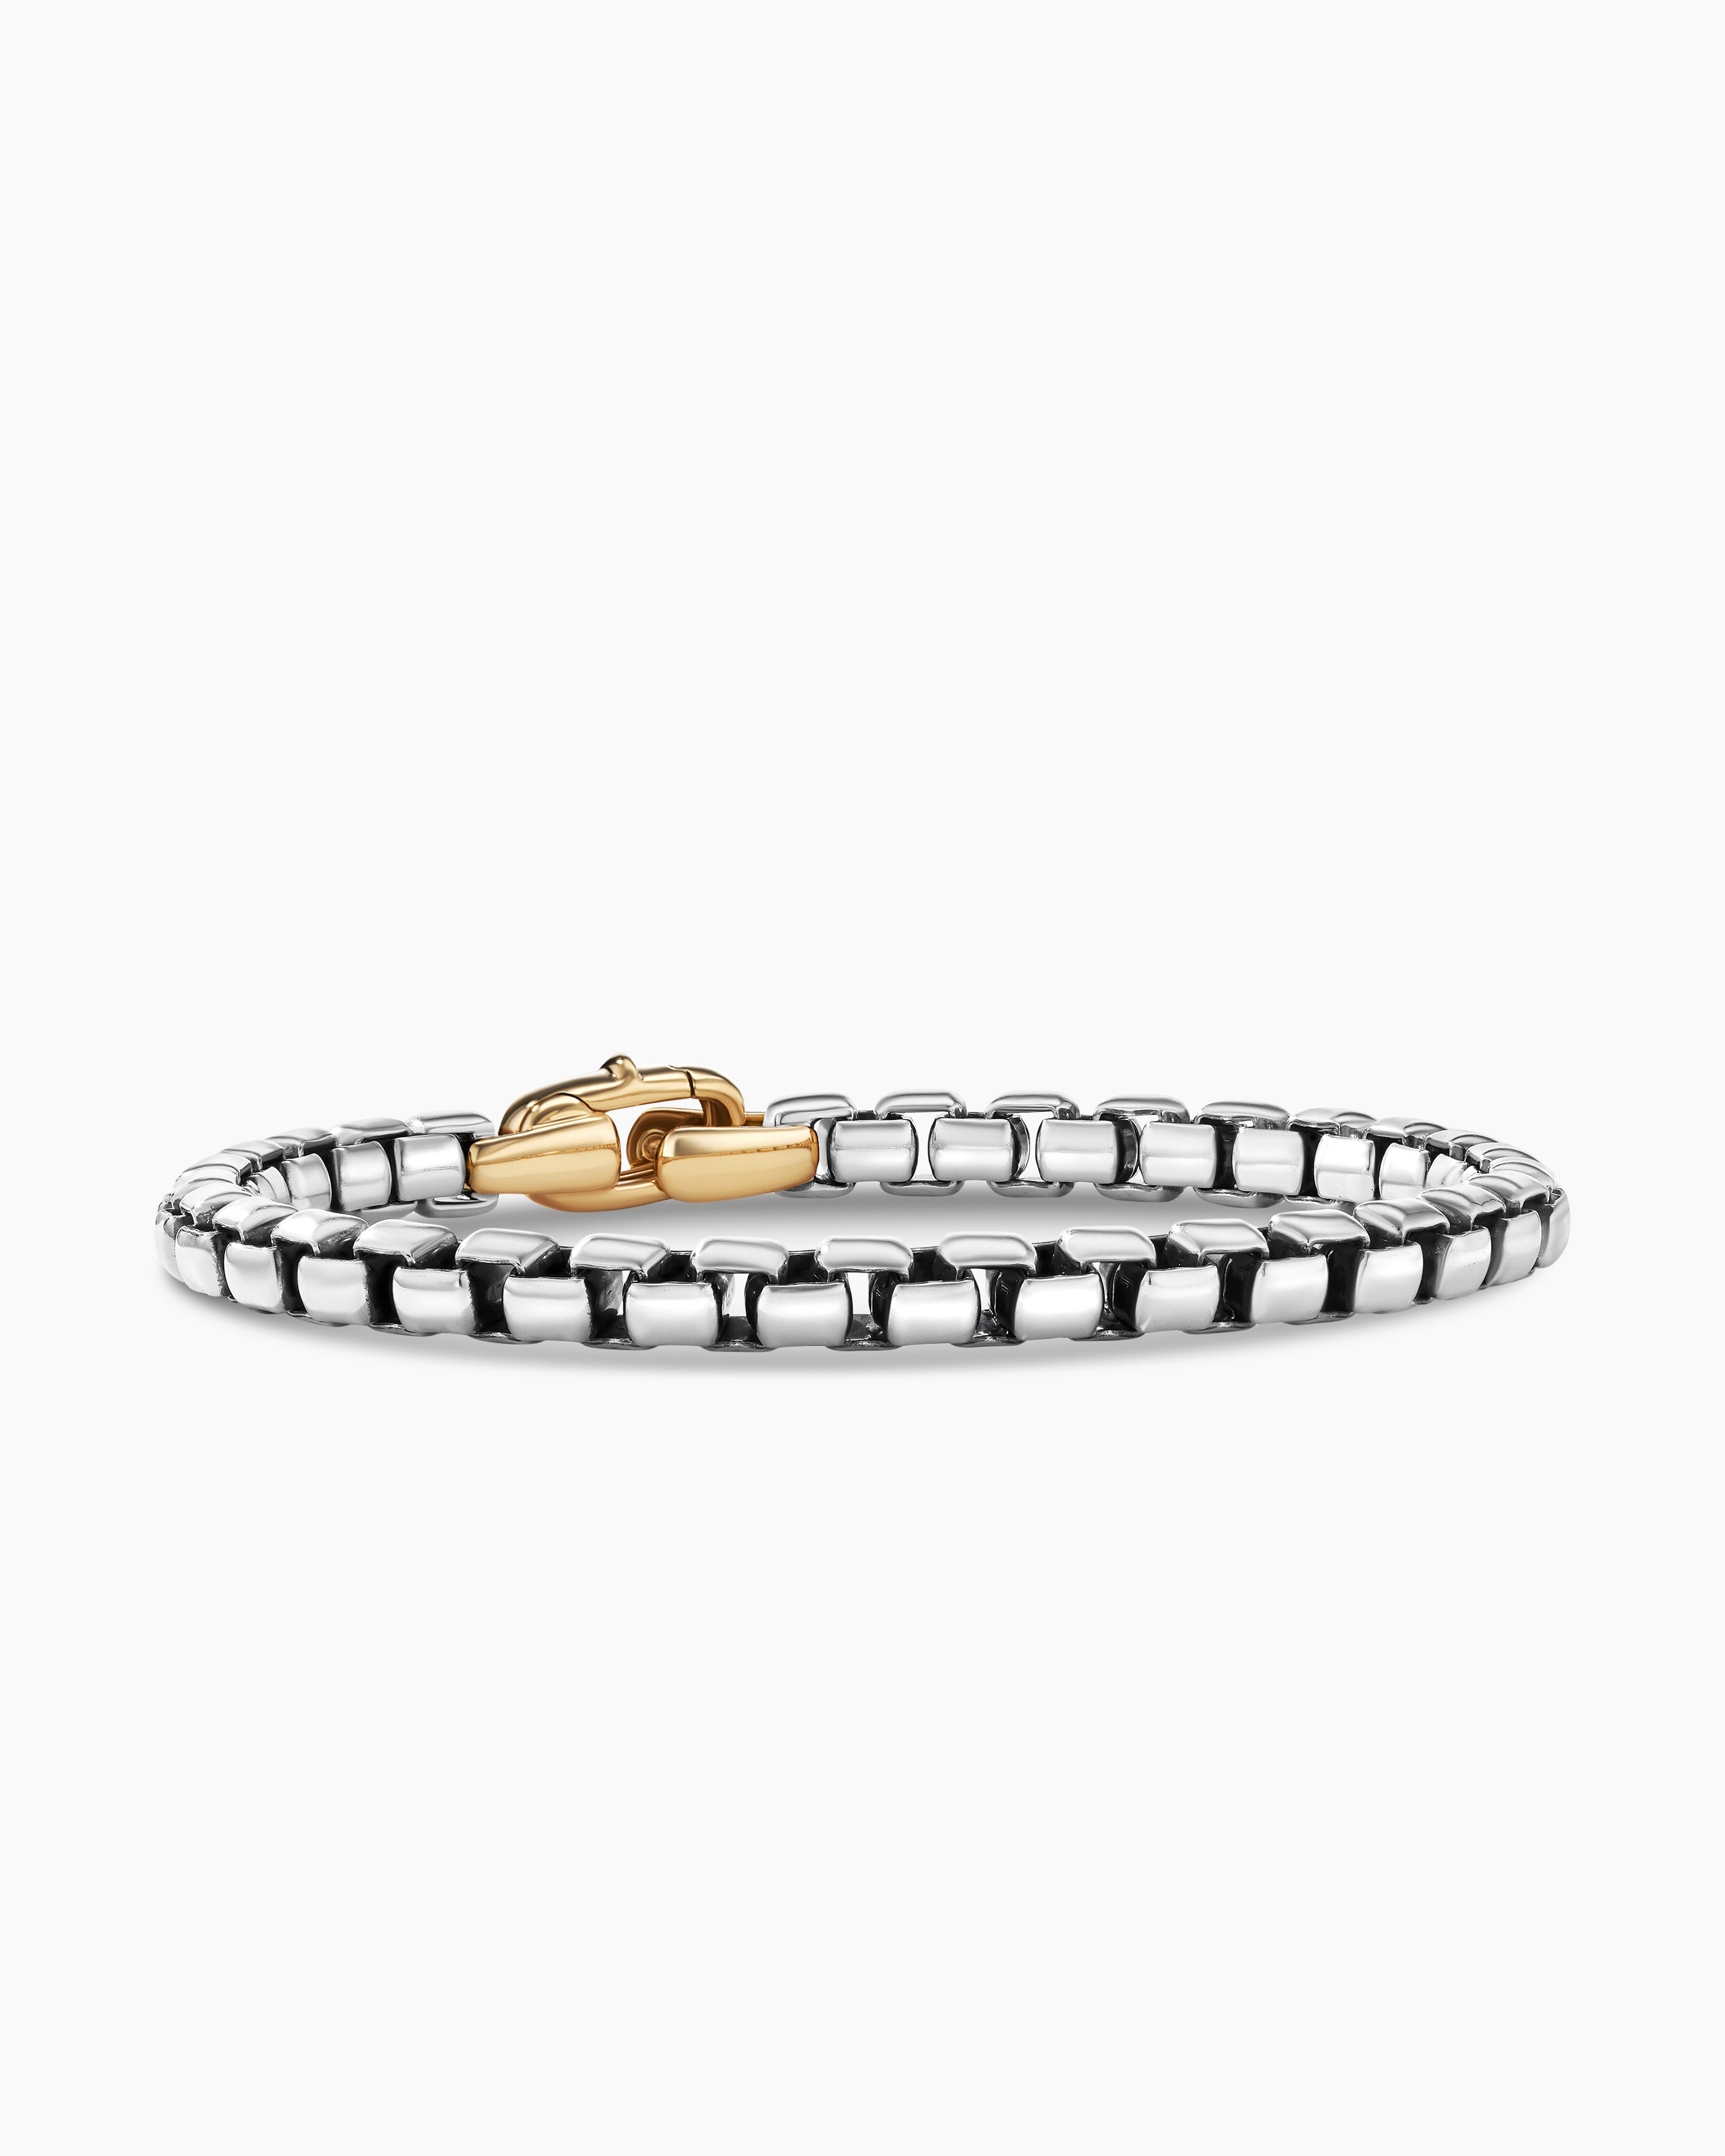 DY Bel Aire Box in | Silver Yurman Chain with Sterling Yellow Gold, Bracelet 6mm David 14K